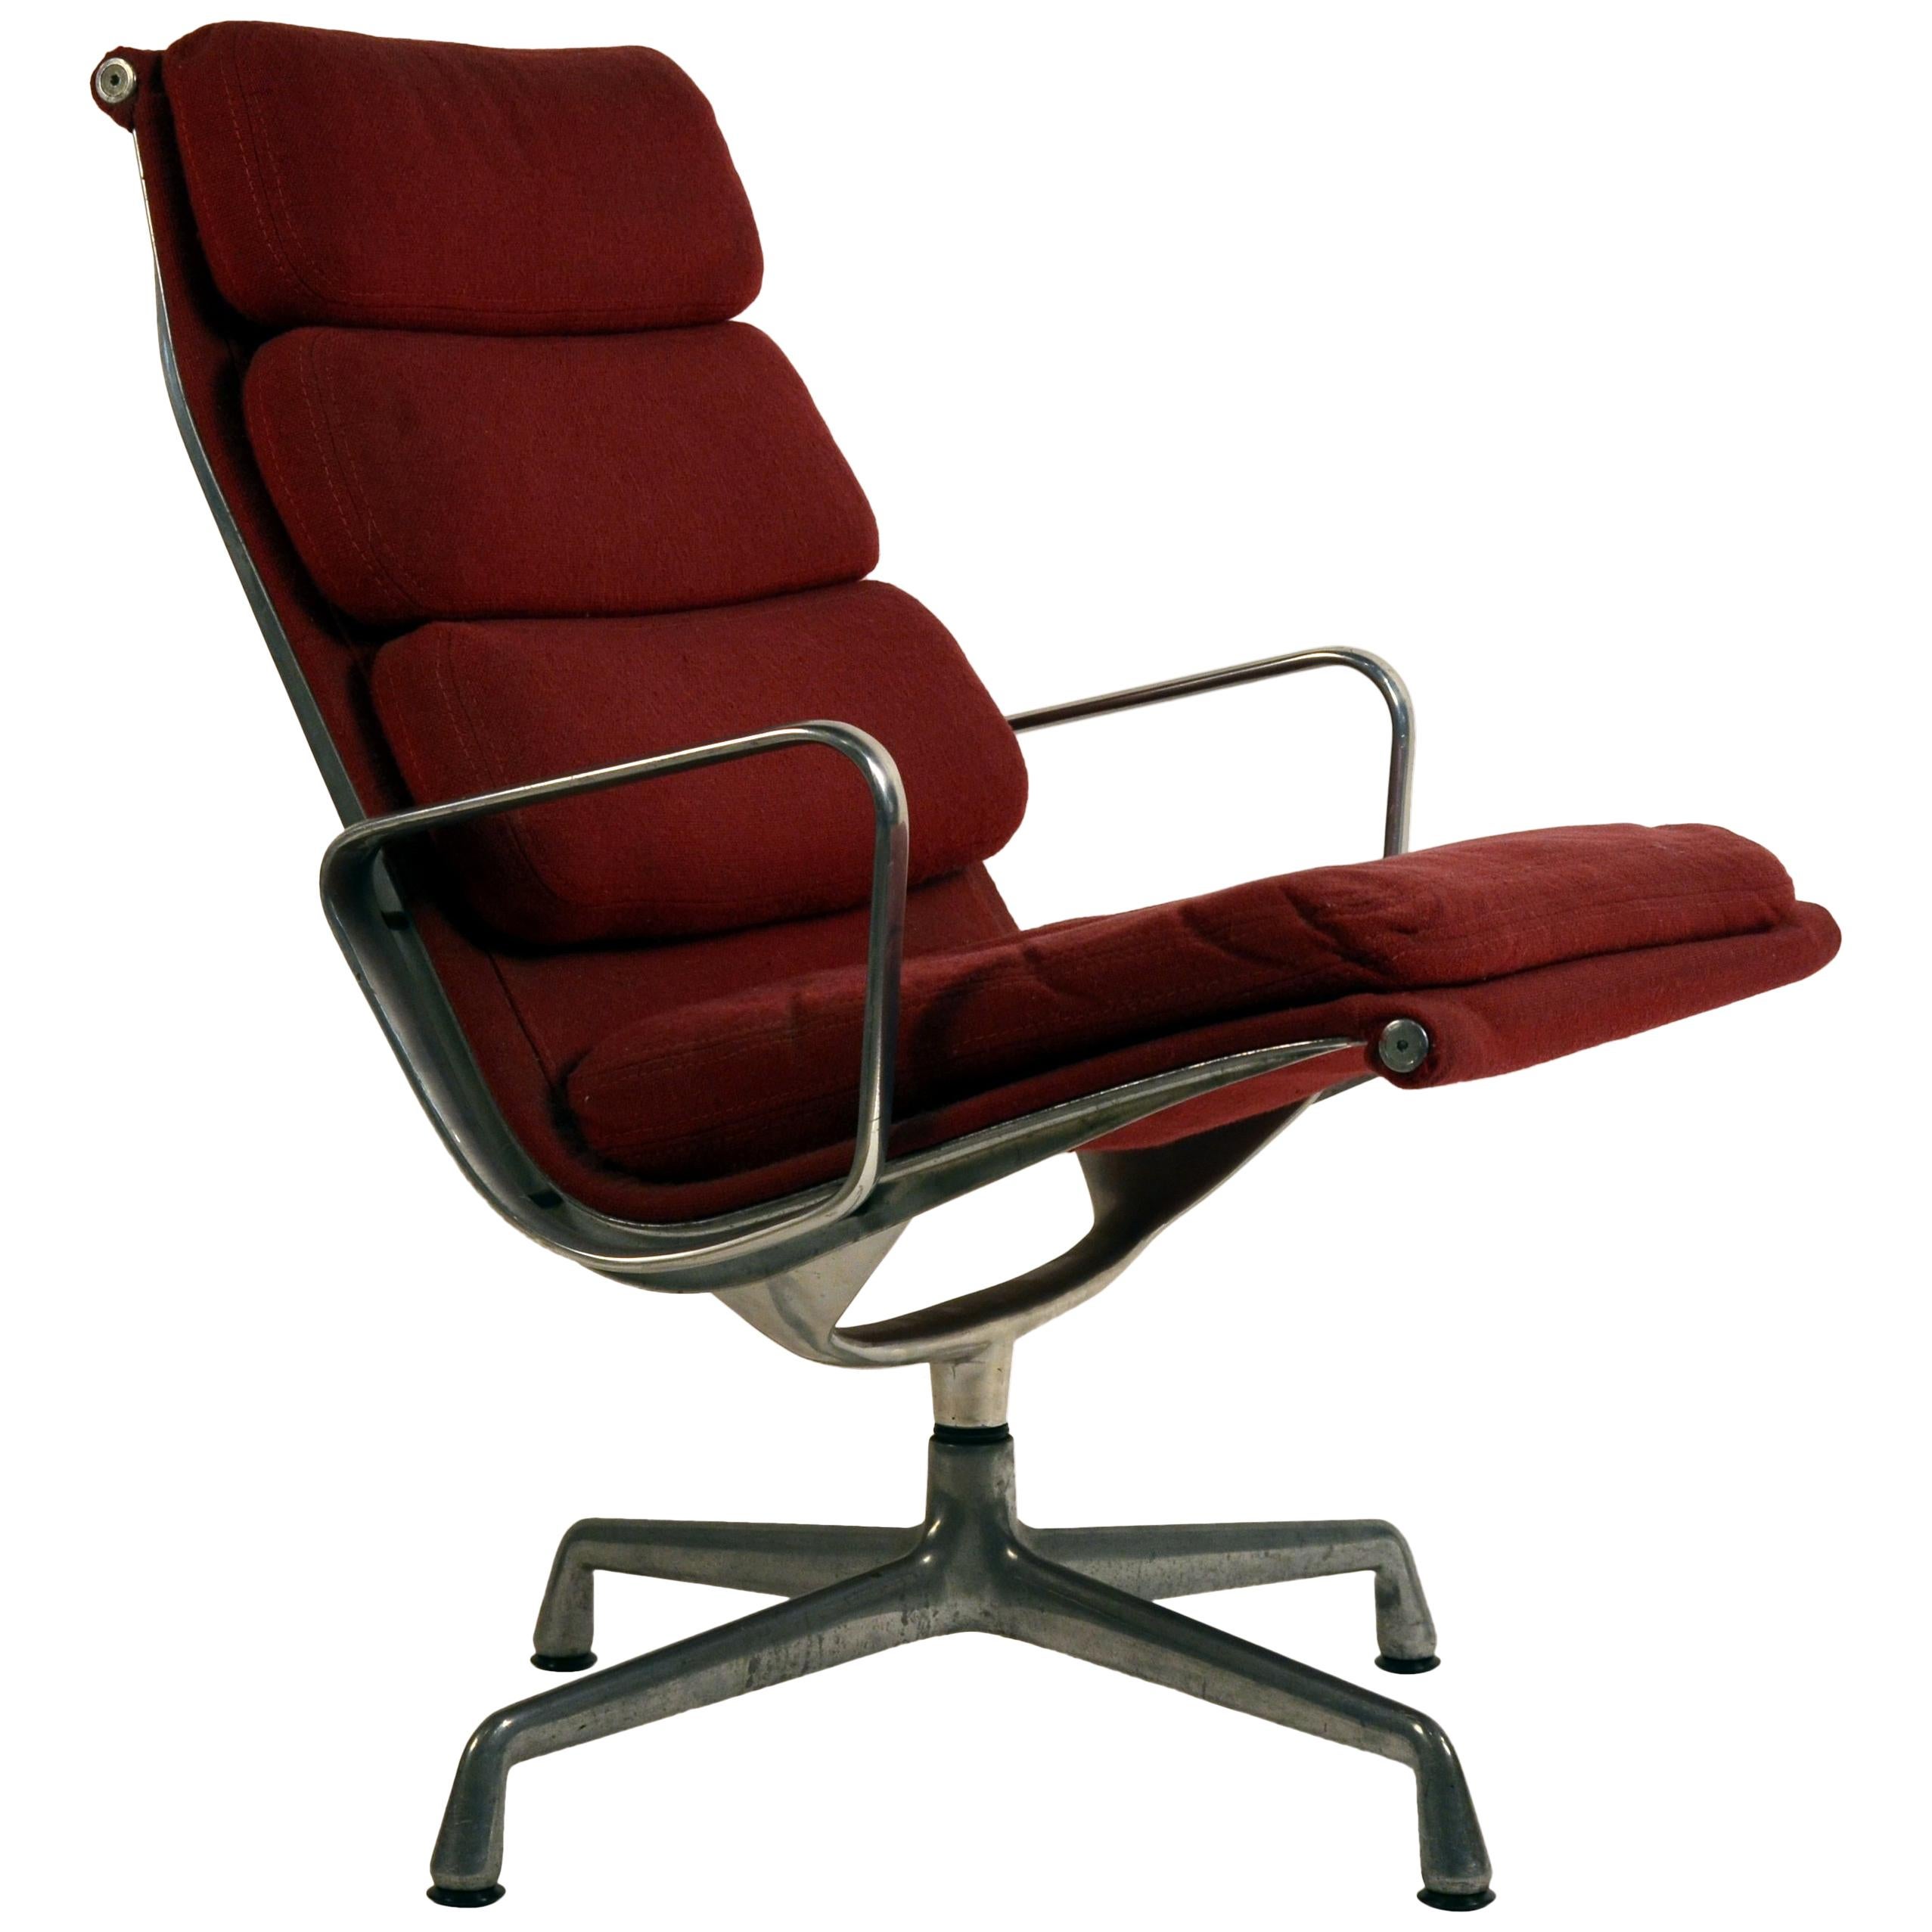 Eames Burgungy EA 216 Soft Pad Swiveling Lounge Chair for Herman Miller